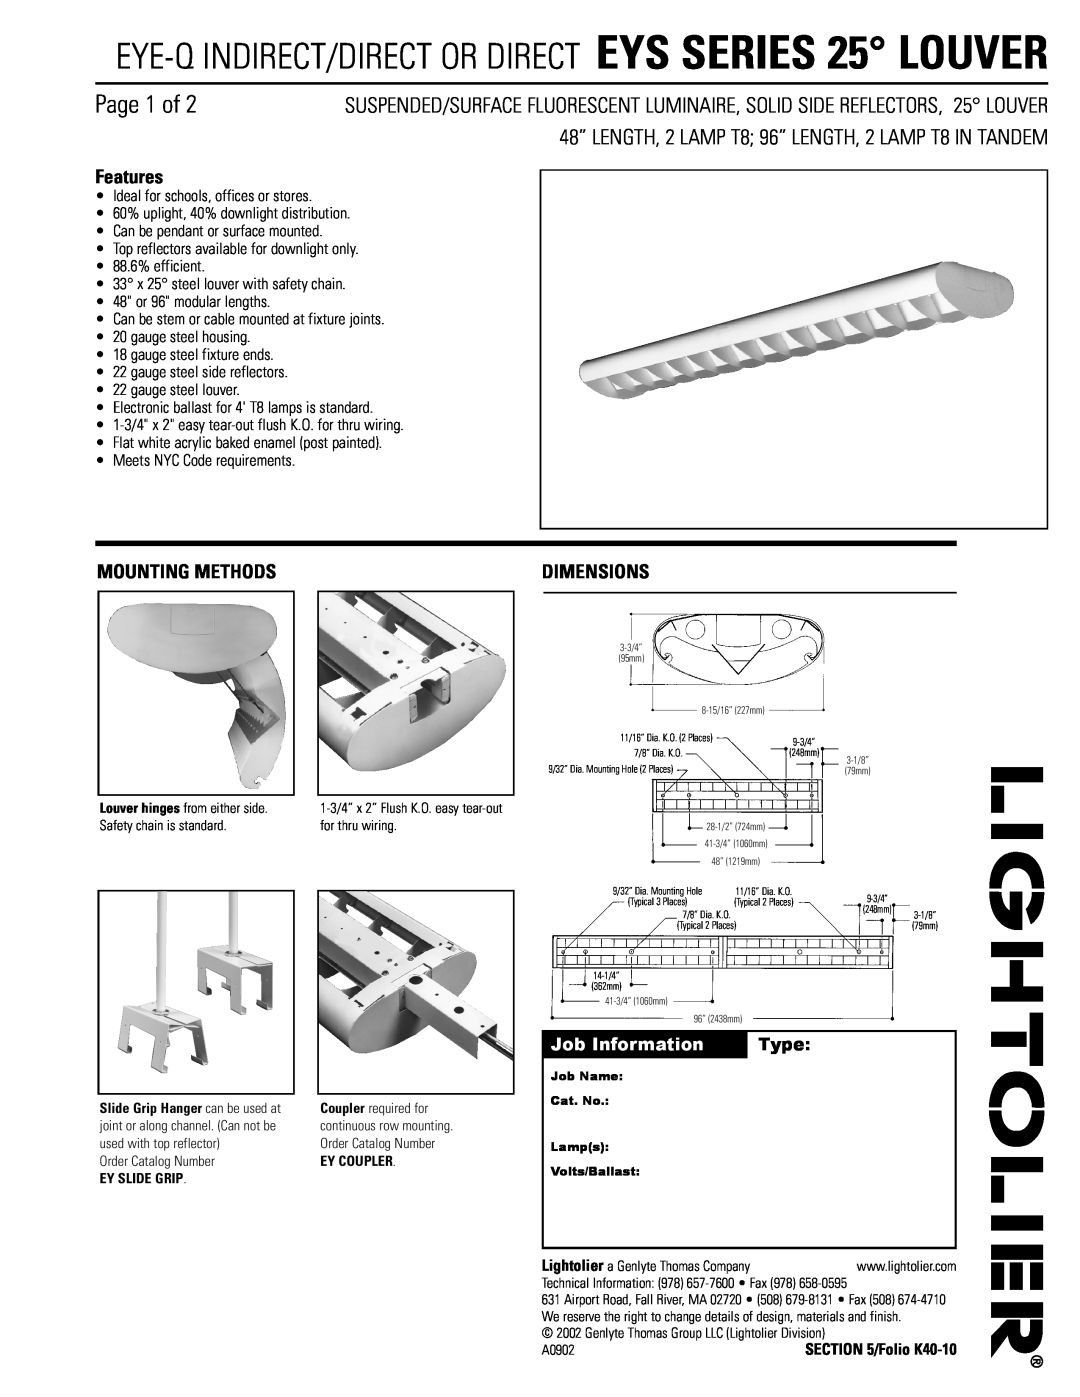 Lightolier EYS Series dimensions Page 1 of, Features, Mounting Methods, Dimensions, Job Information, Type 